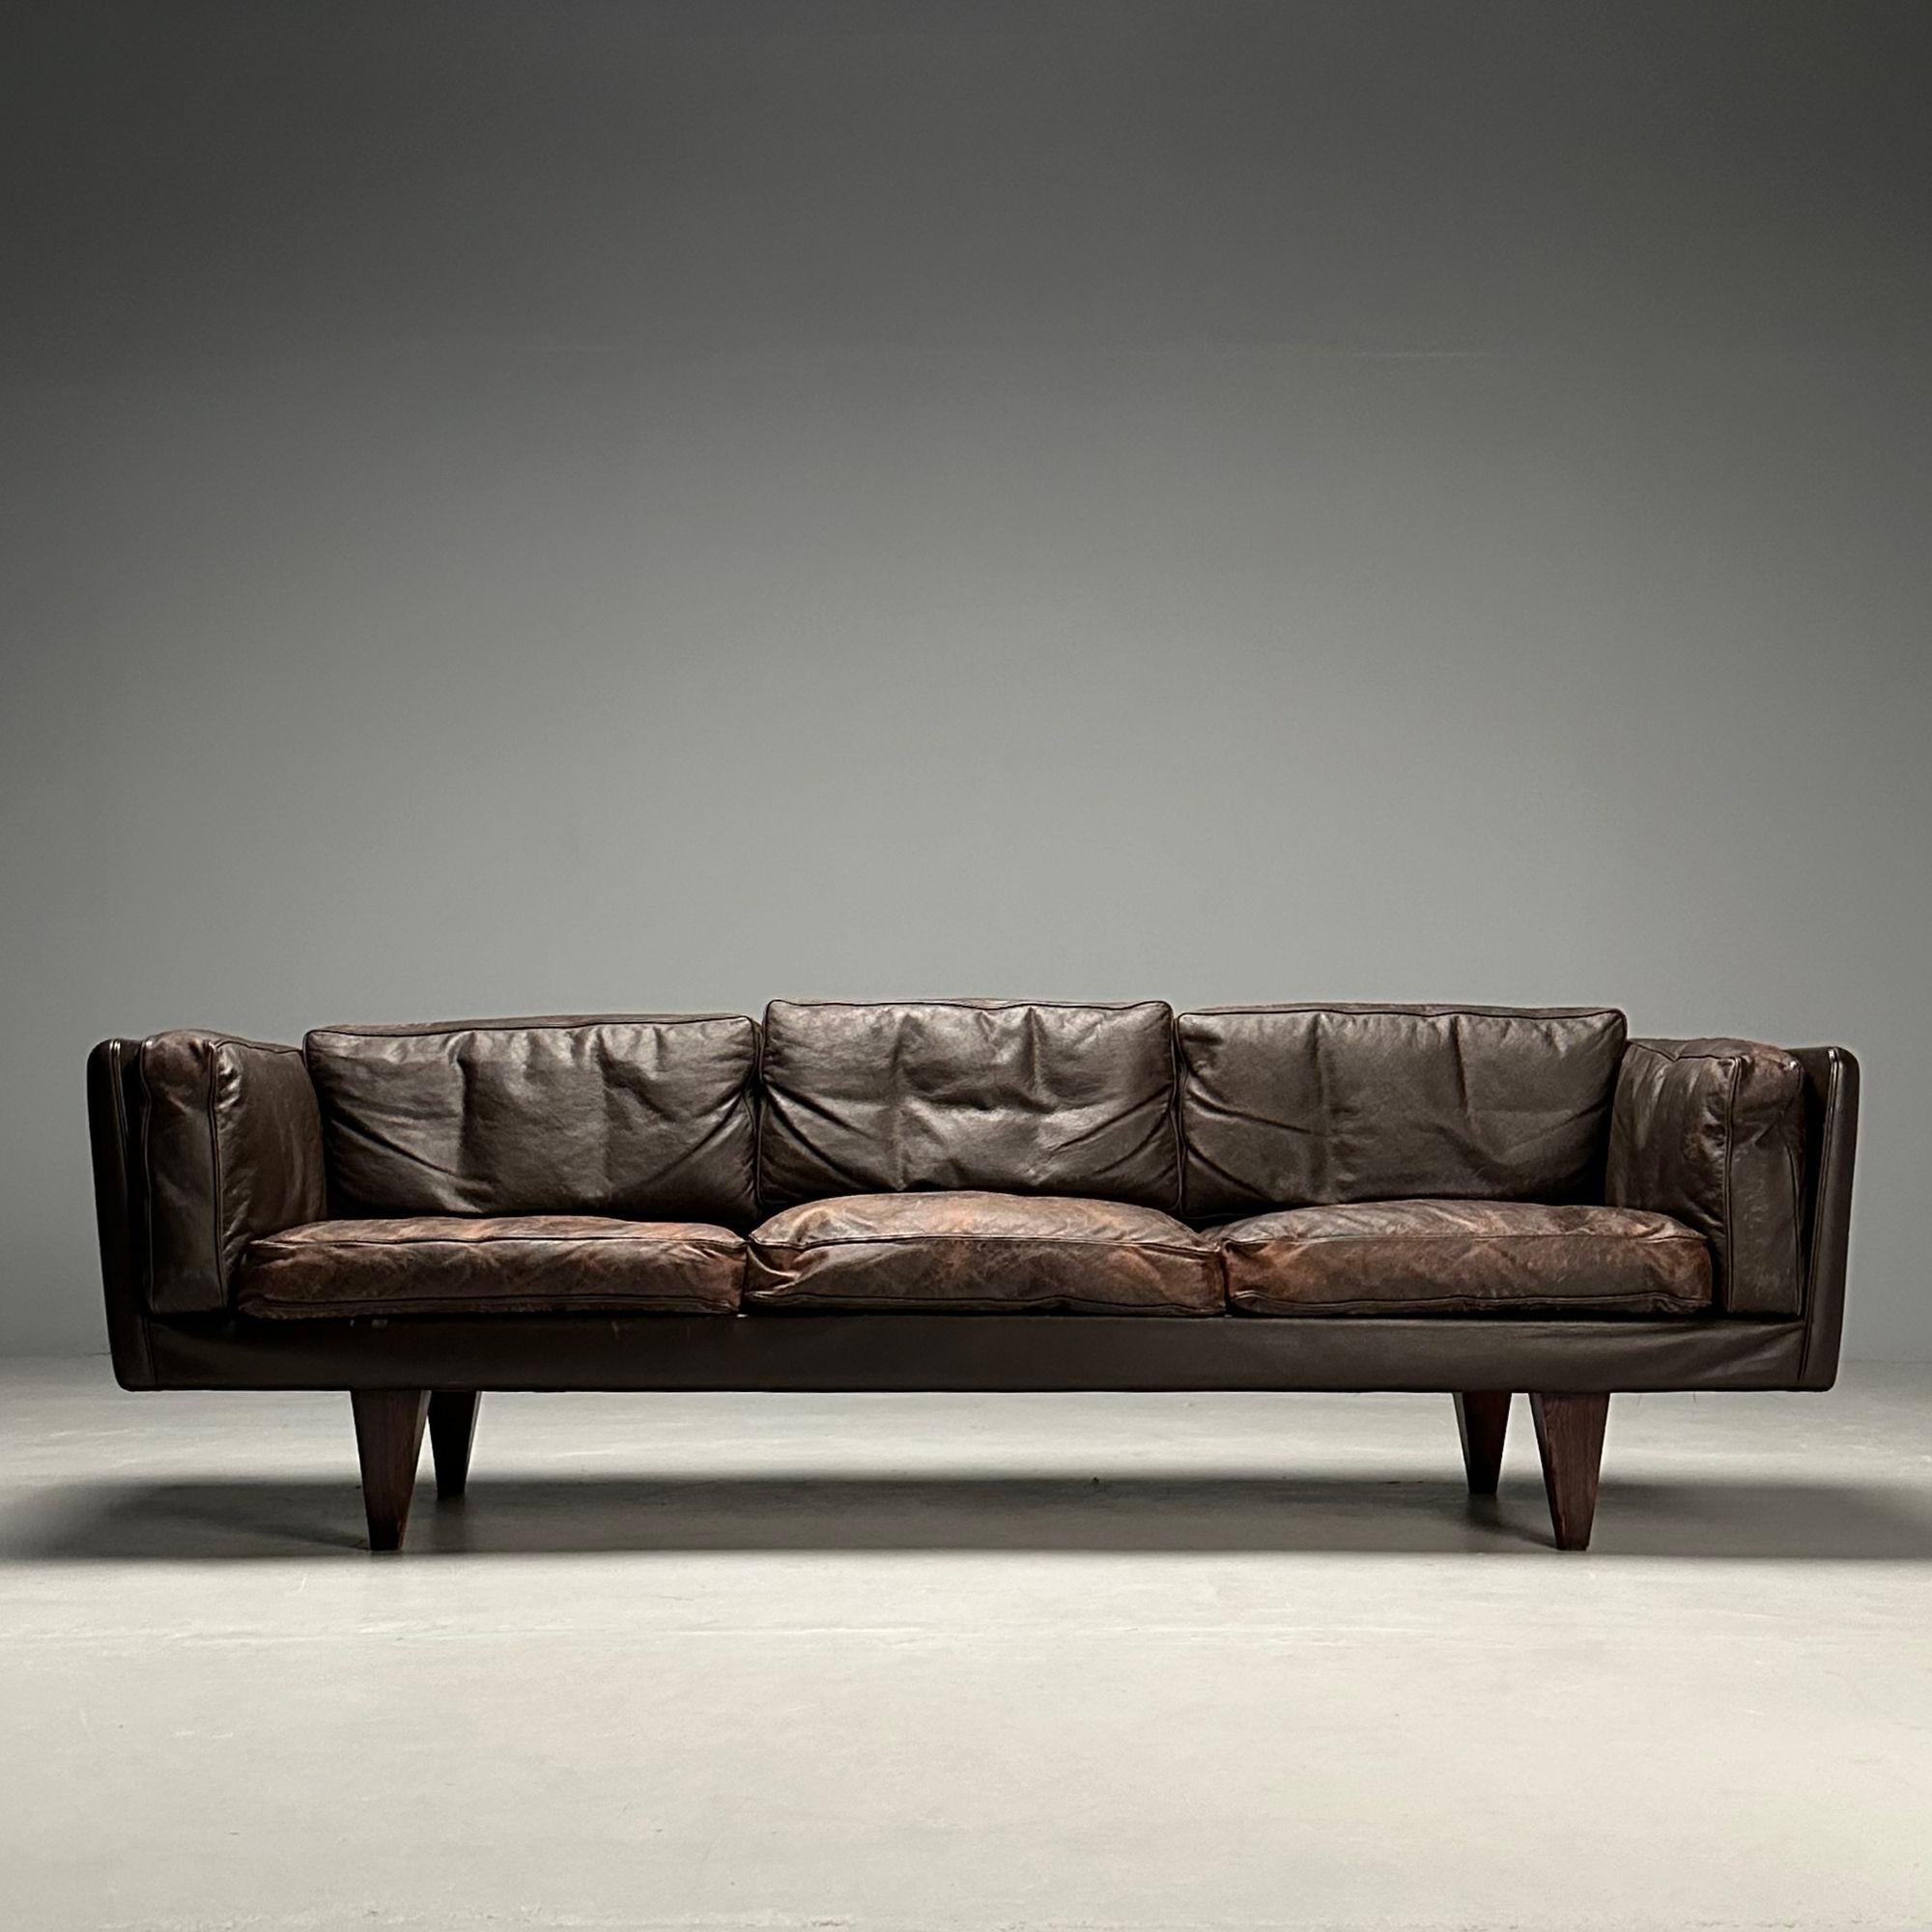 Illum Wikkelsö, Danish Mid-Century Modern, Rare Sofa, Distressed Brown Leather, Rosewood Legs, 1960s

An example of a three seater sofa designed by Illum Wikkelsö for Holger Christiansen in Denmark, 1960s. This model VII sofa maintains it's original